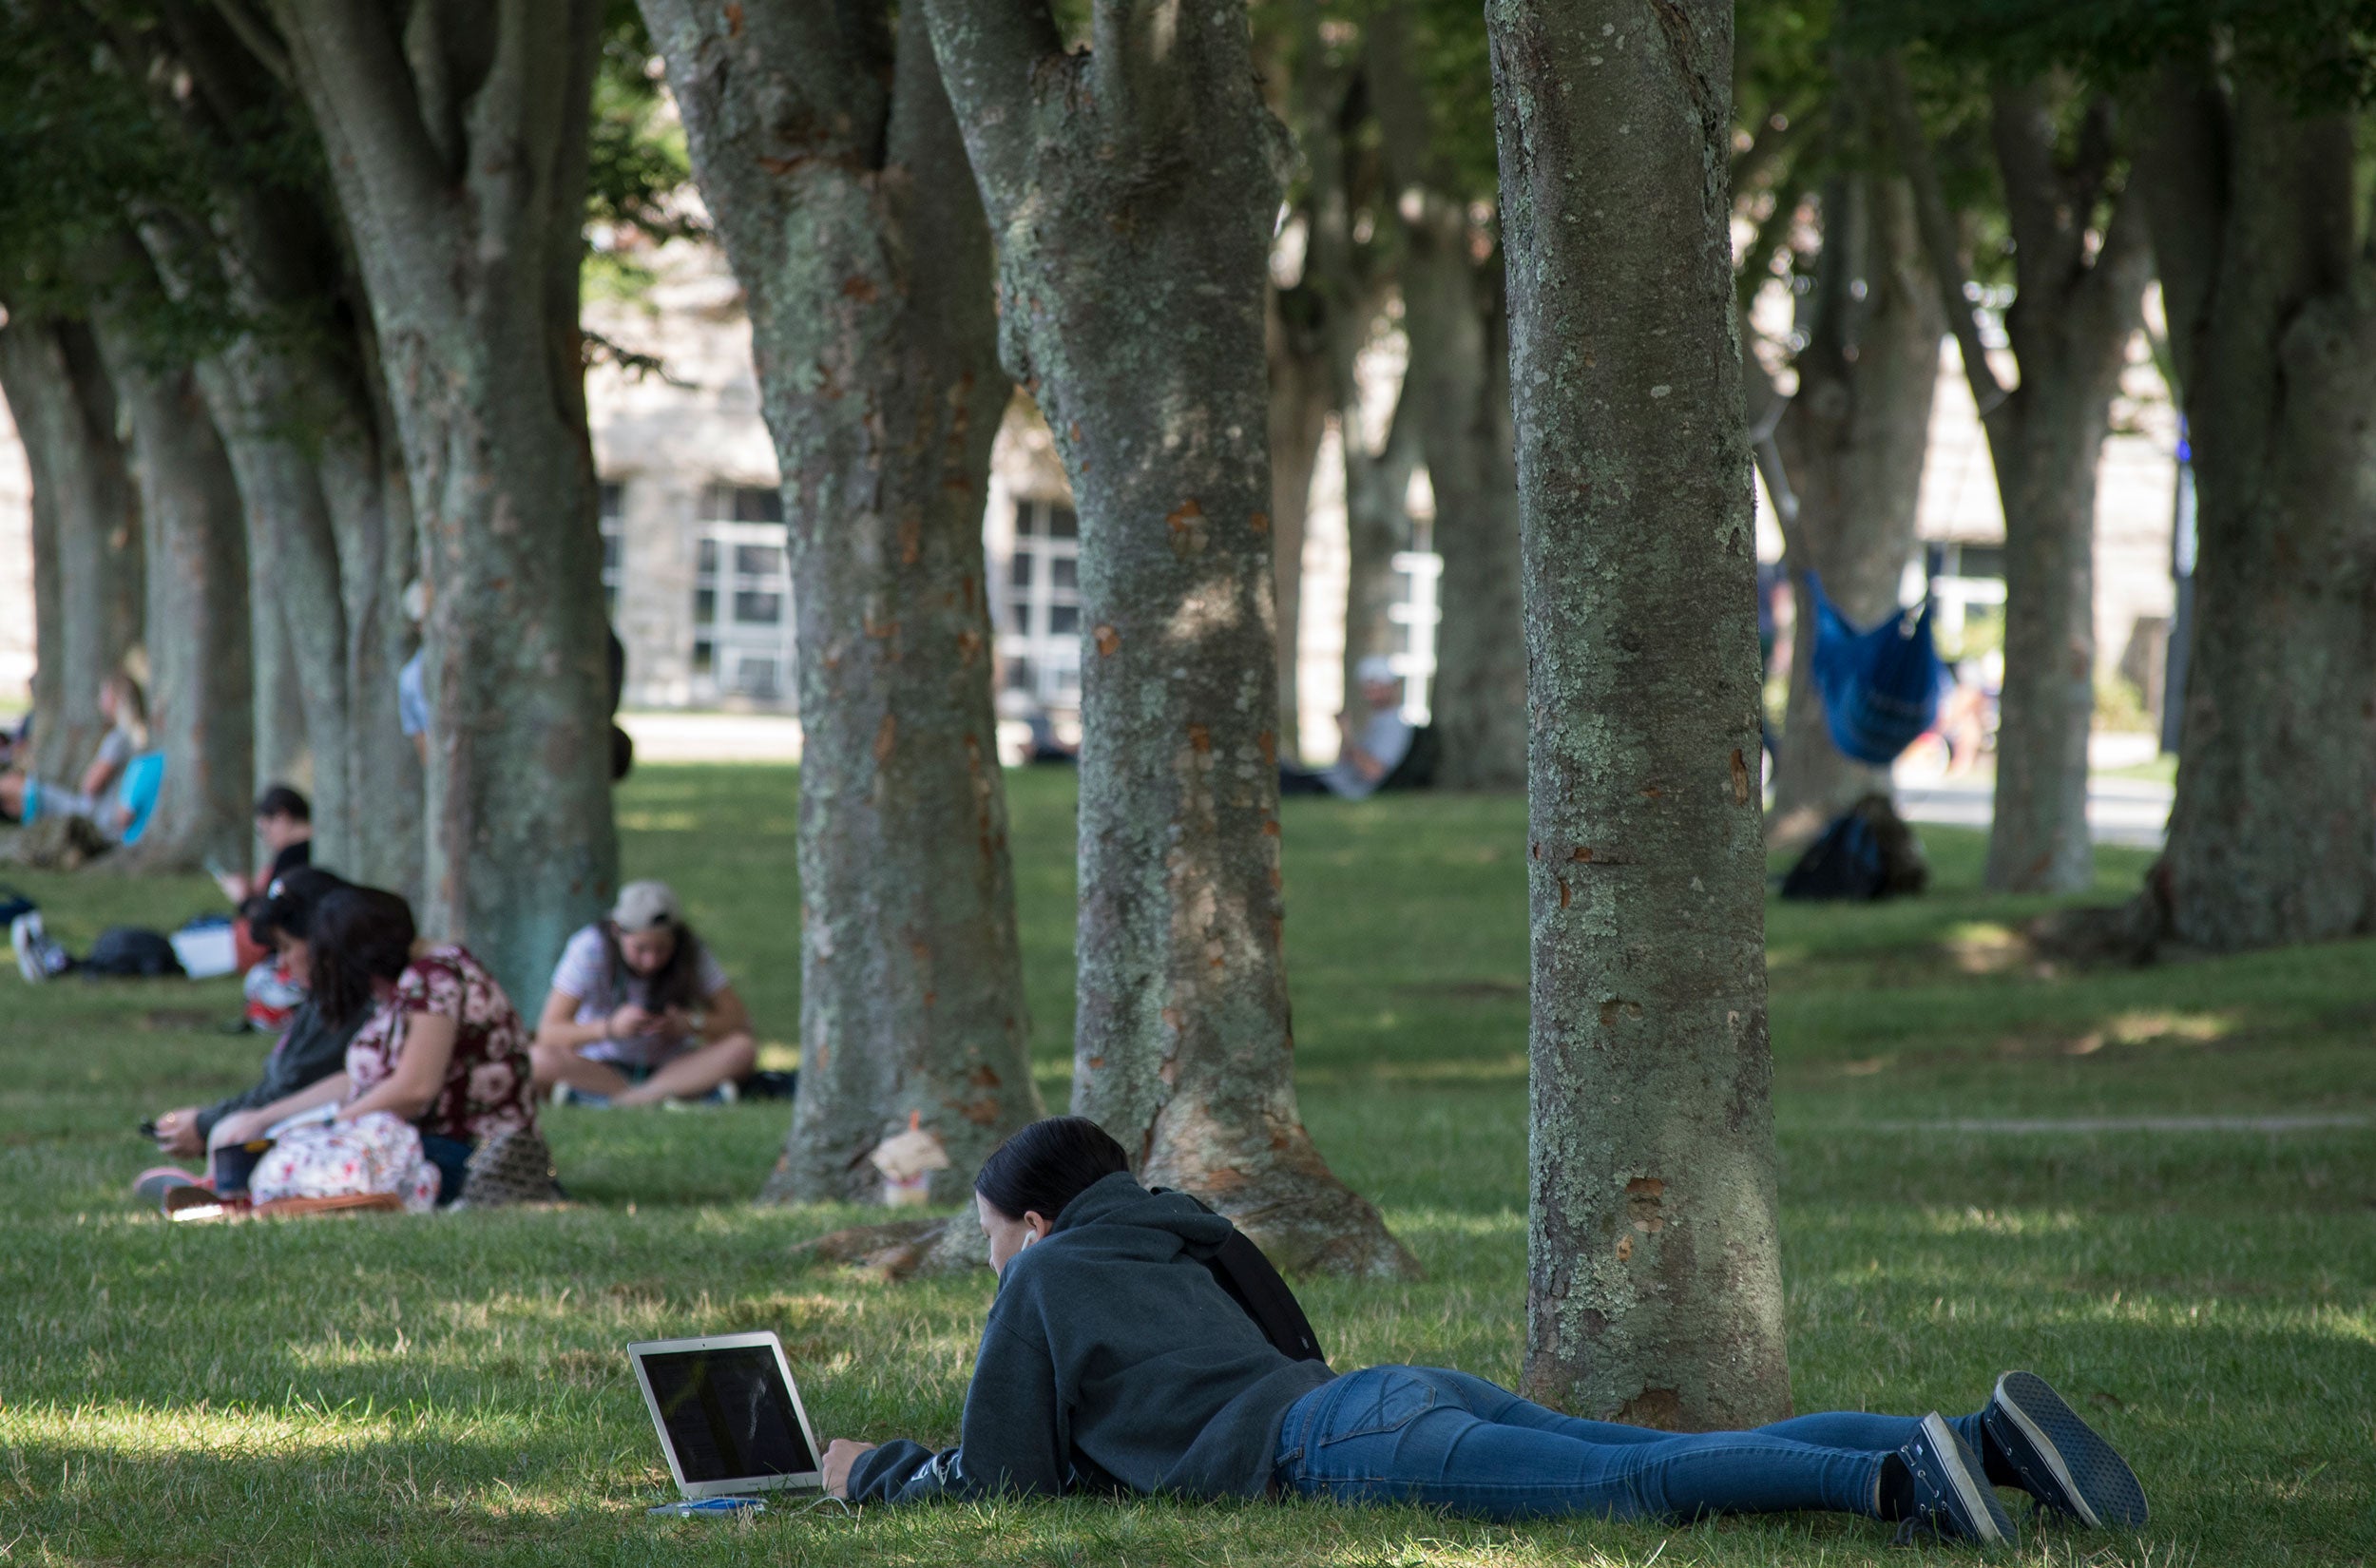 Students studying under the trees on the Quad